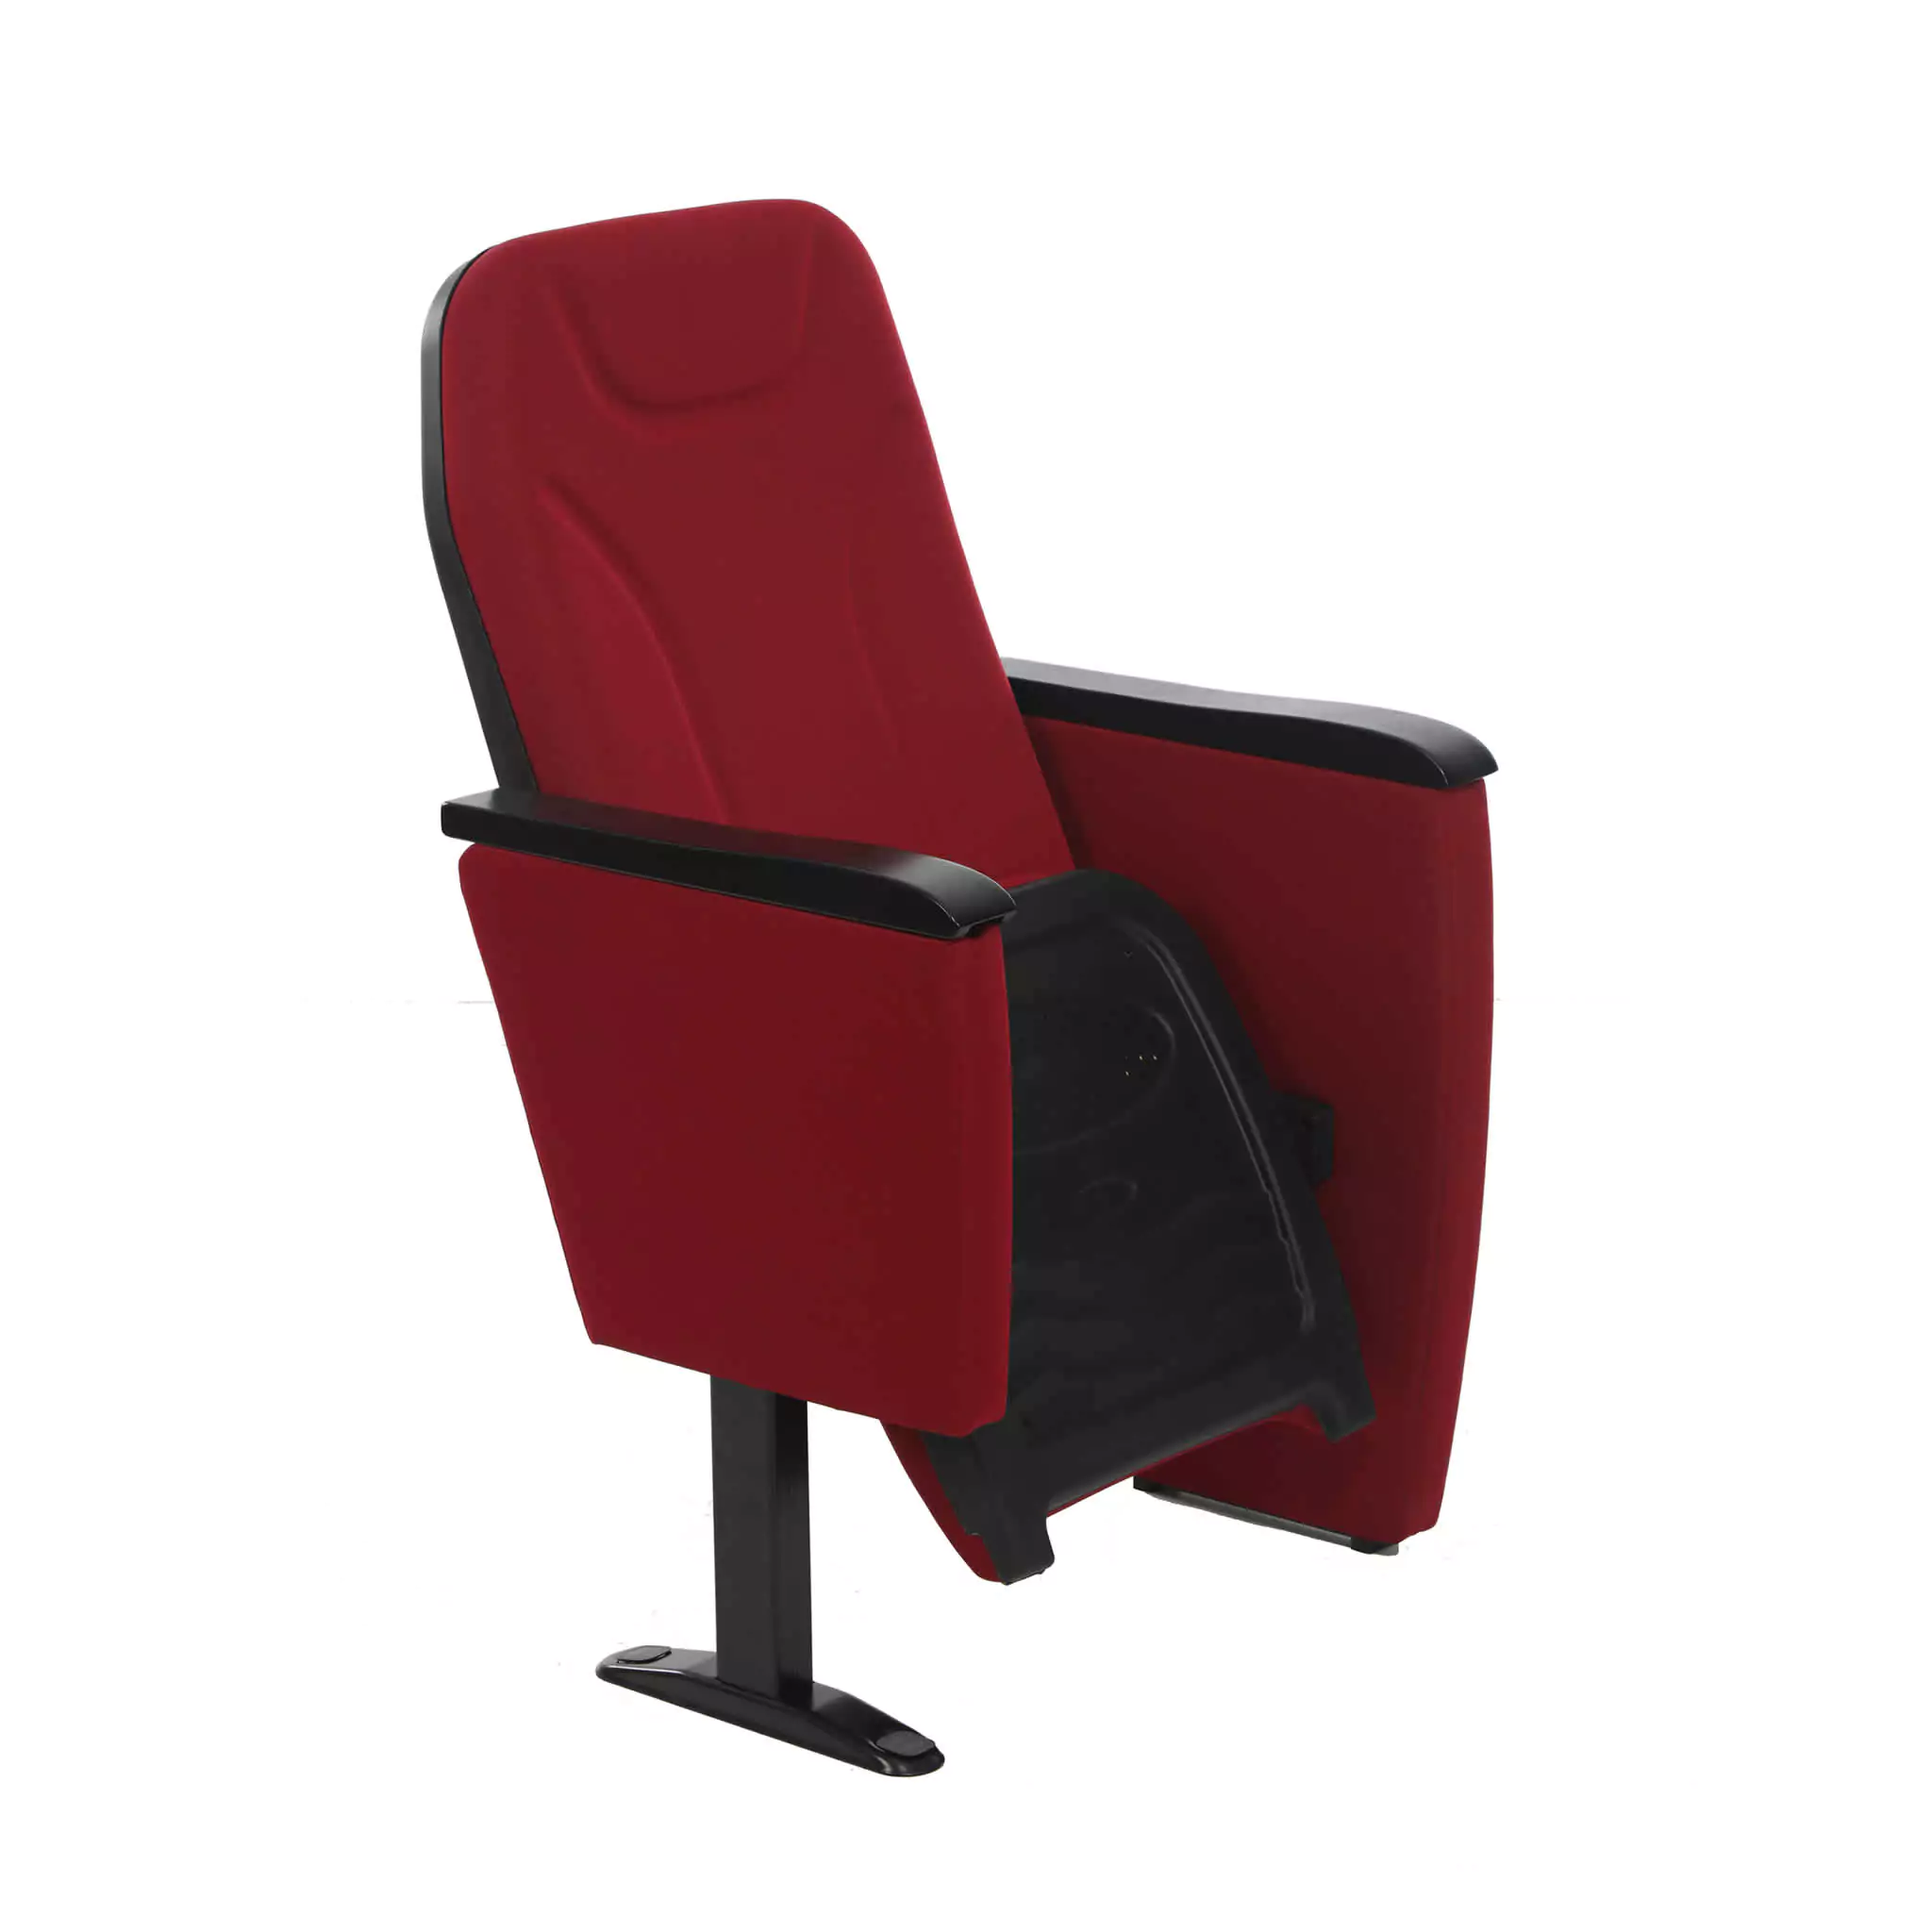 Simko Seating Product Conference Seat Zirkon 03